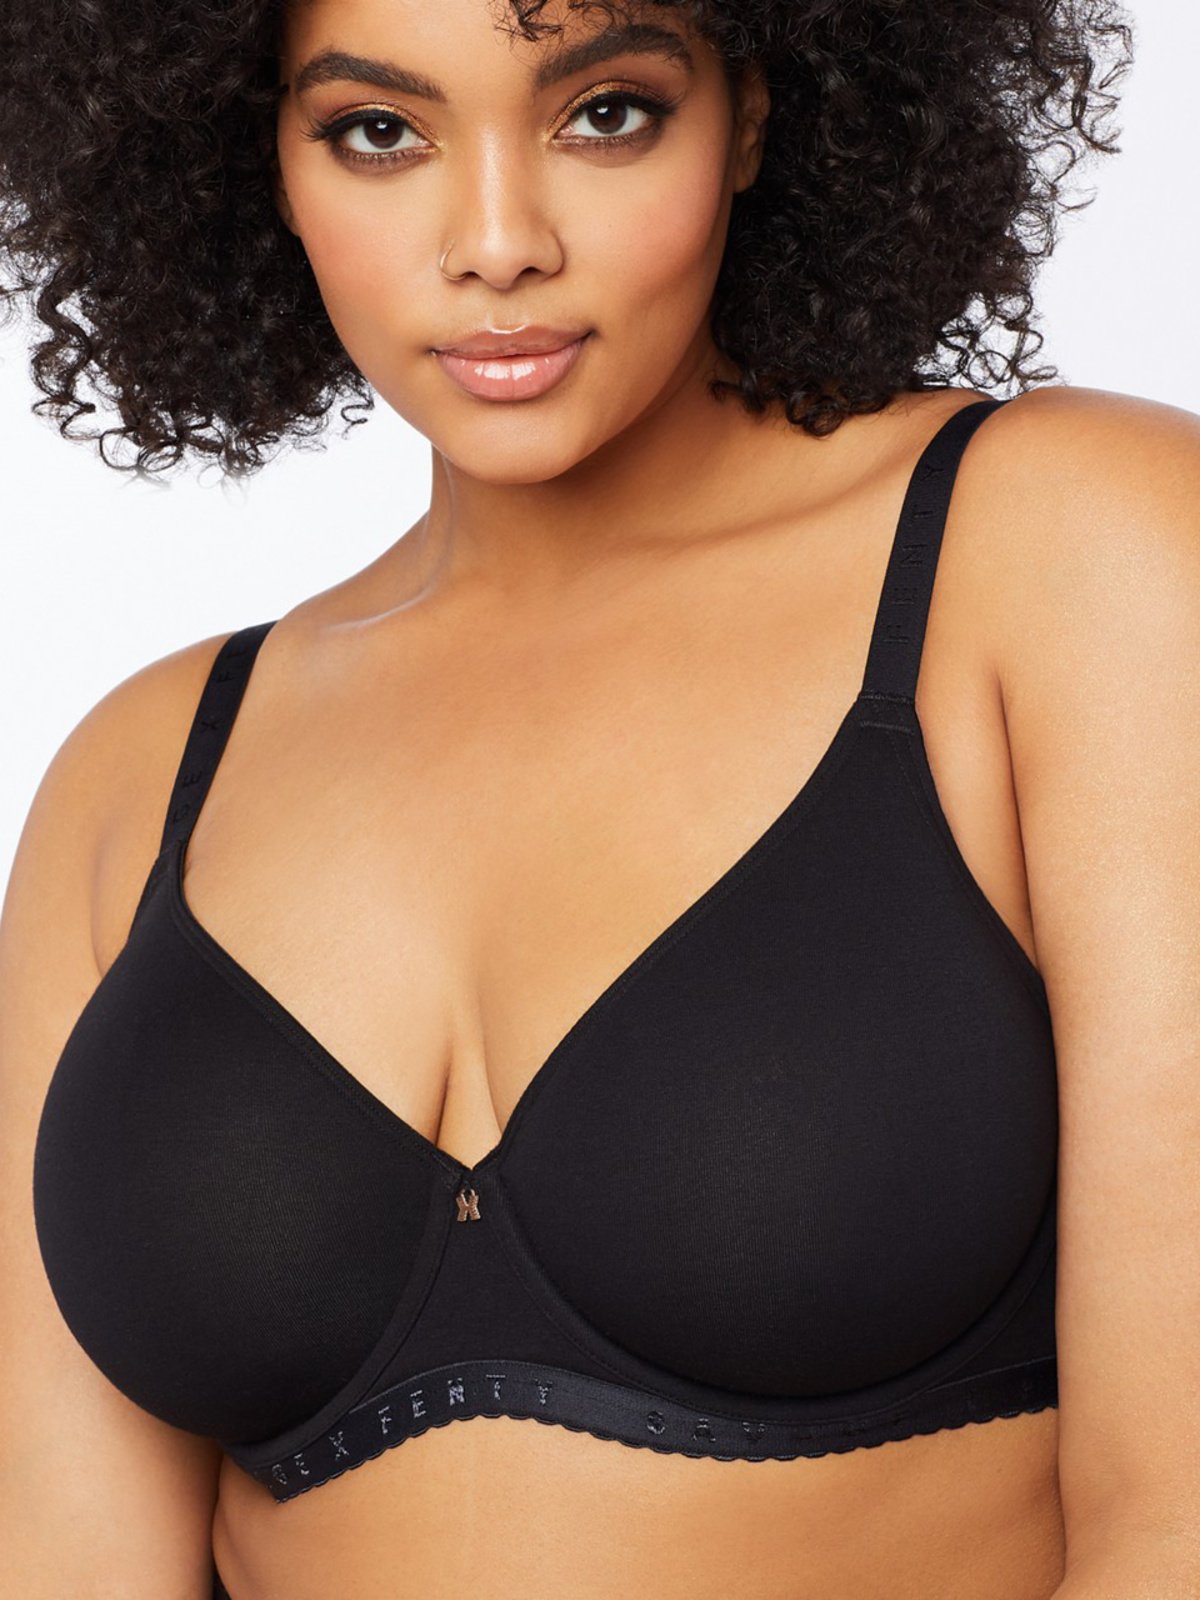 Savage Fenty Dear Diary Embroidered Unlined Bra. Size 34D. Color: Black  Caviar